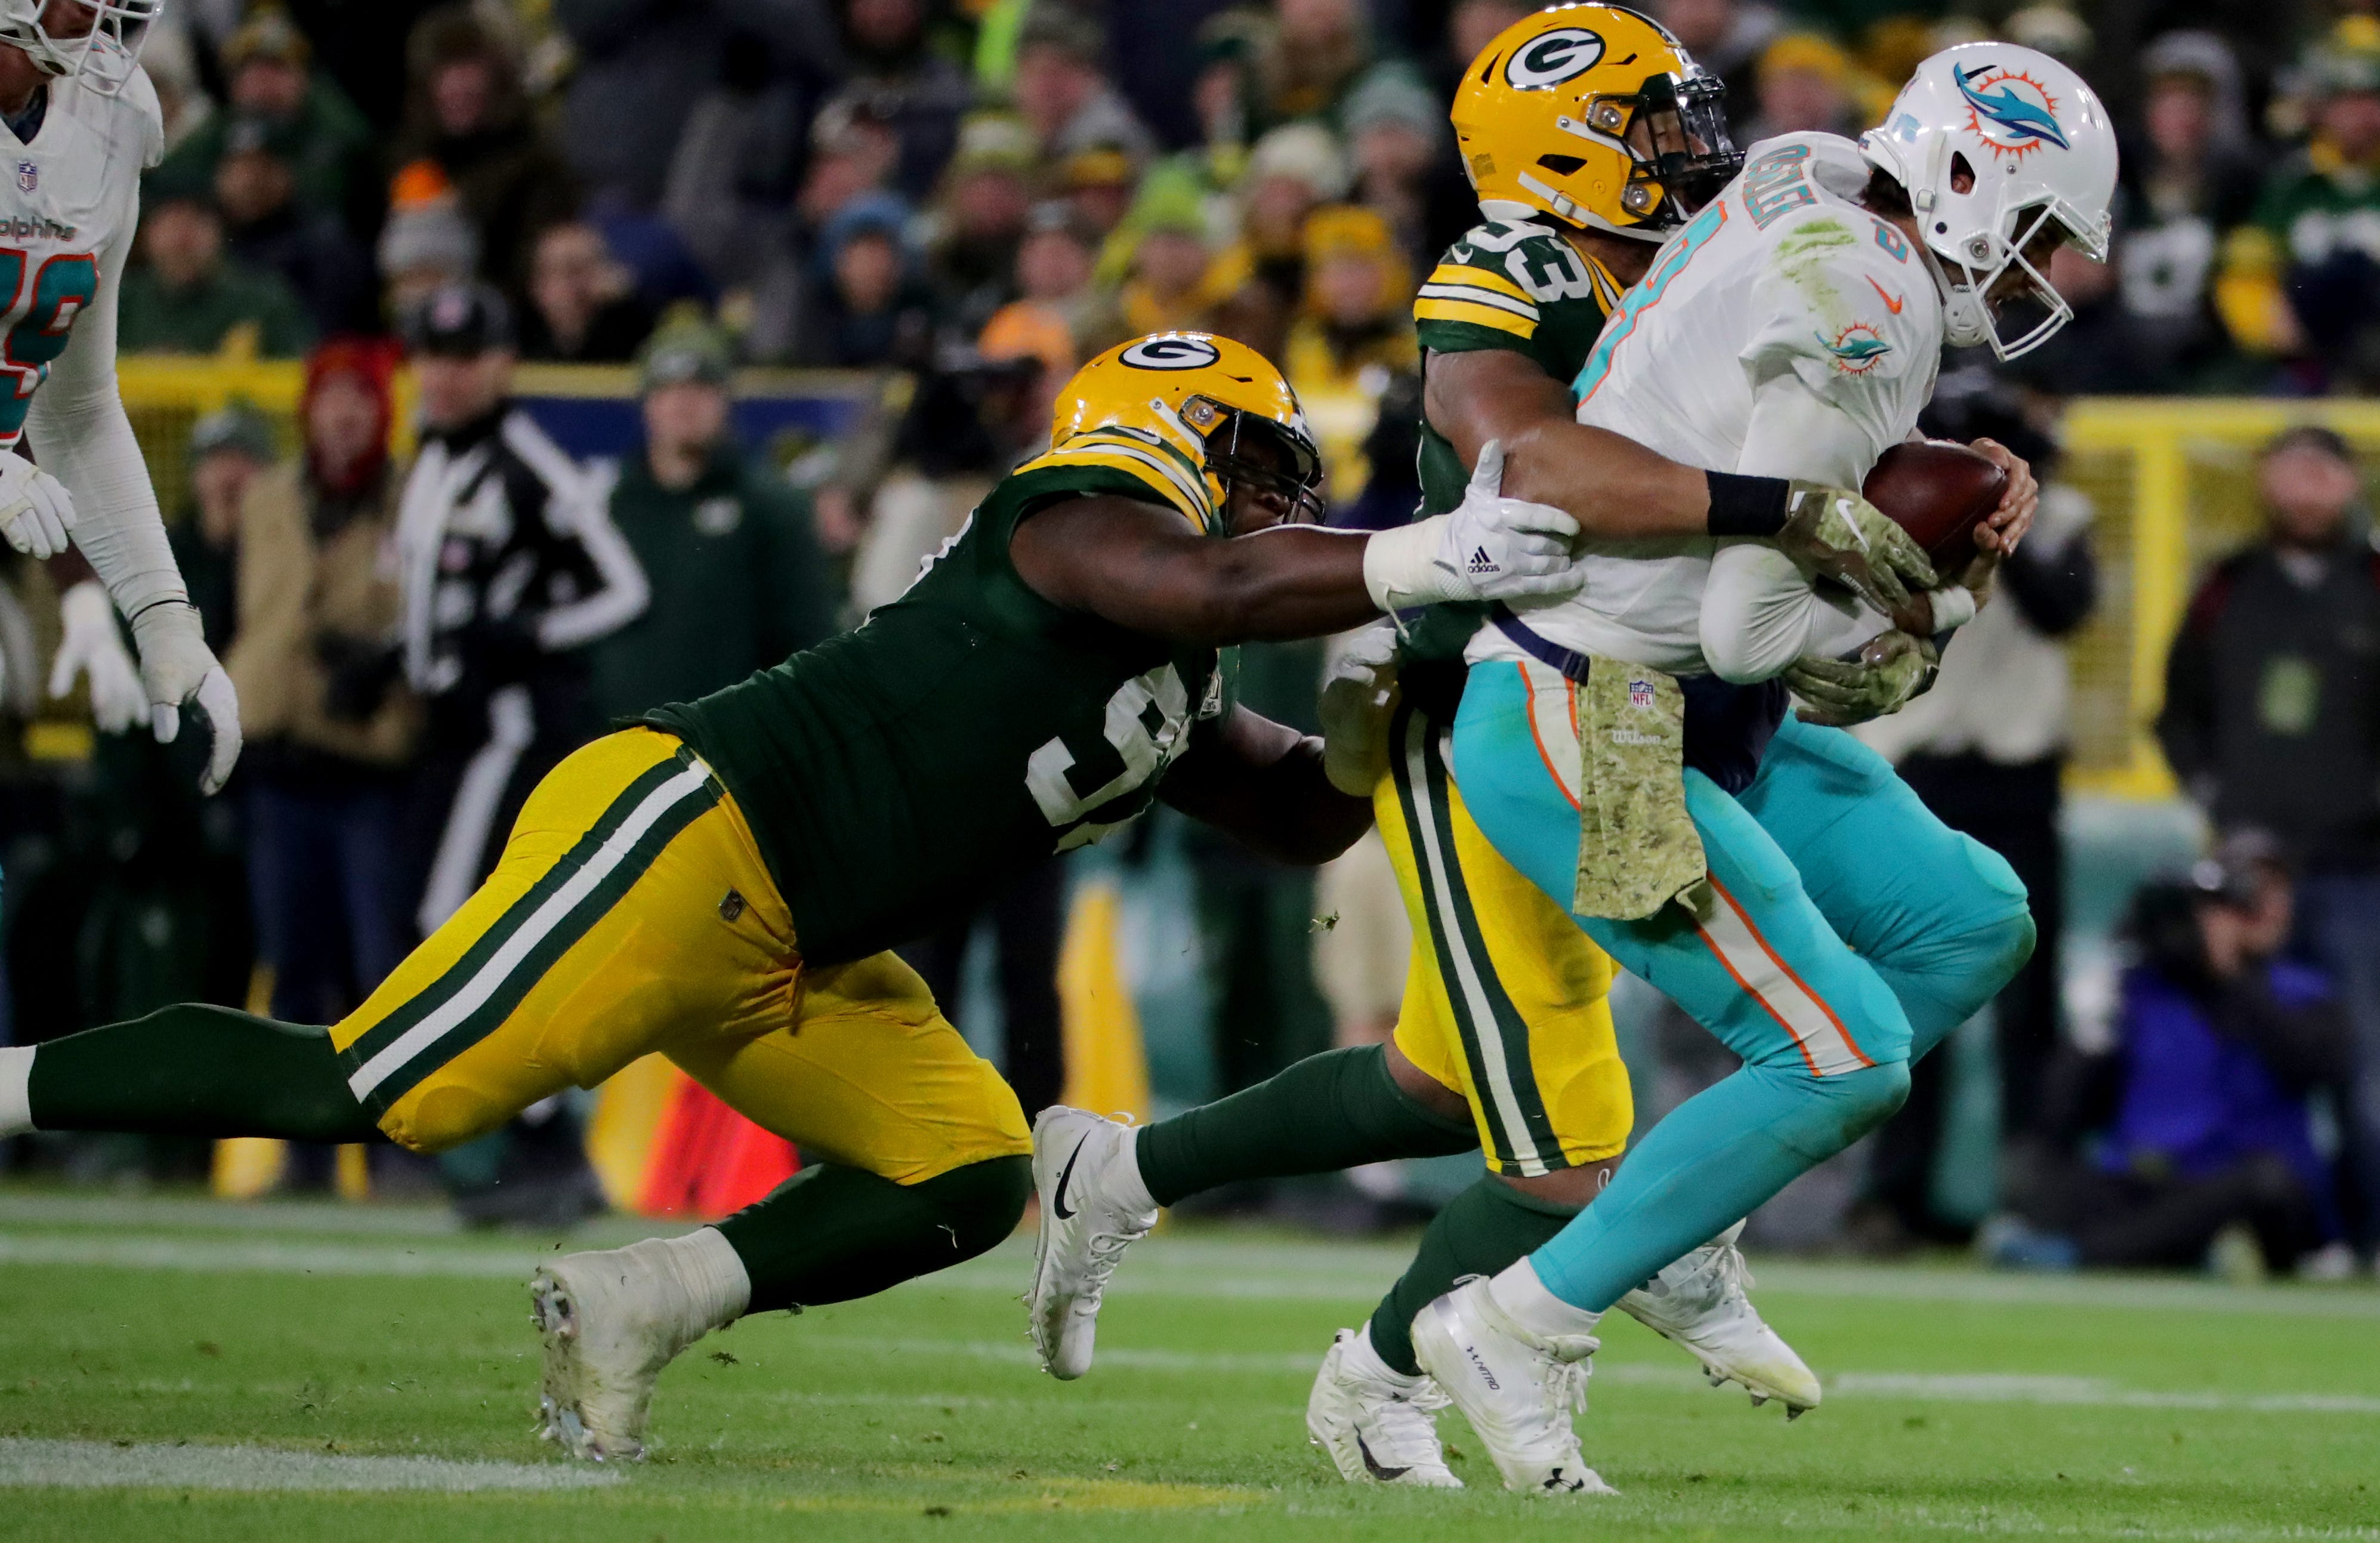 Green Bay Packers nose tackle Kenny Clark (97), left, and Green Bay Packers linebacker Reggie Gilbert (93) sack Miami Dolphins quarterback Brock Osweiler (8) during the 4th quarter of the Green Bay Packers 31-12 win against the Miami Dolphins at Lambeau Field in Green Bay, Wis. on Sunday, November 11, 2018. Mike De Sisti / USA TODAY NETWORK-Wis